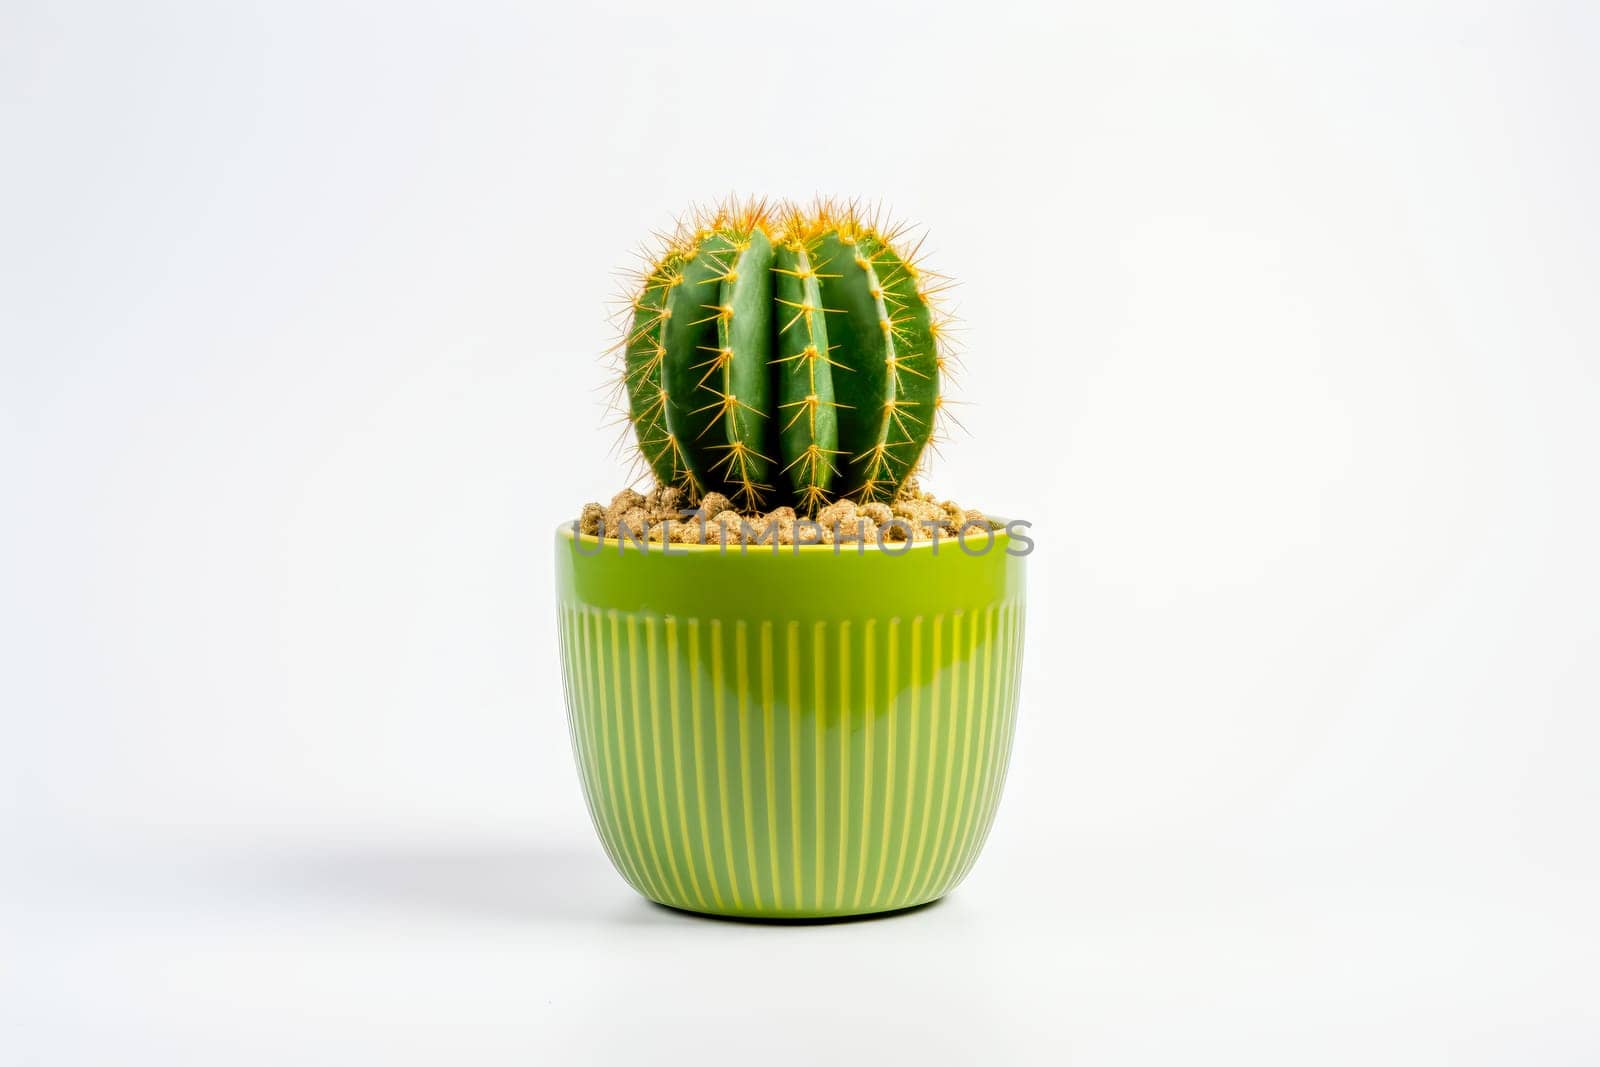 green small cactus in a pot isolated on a white background